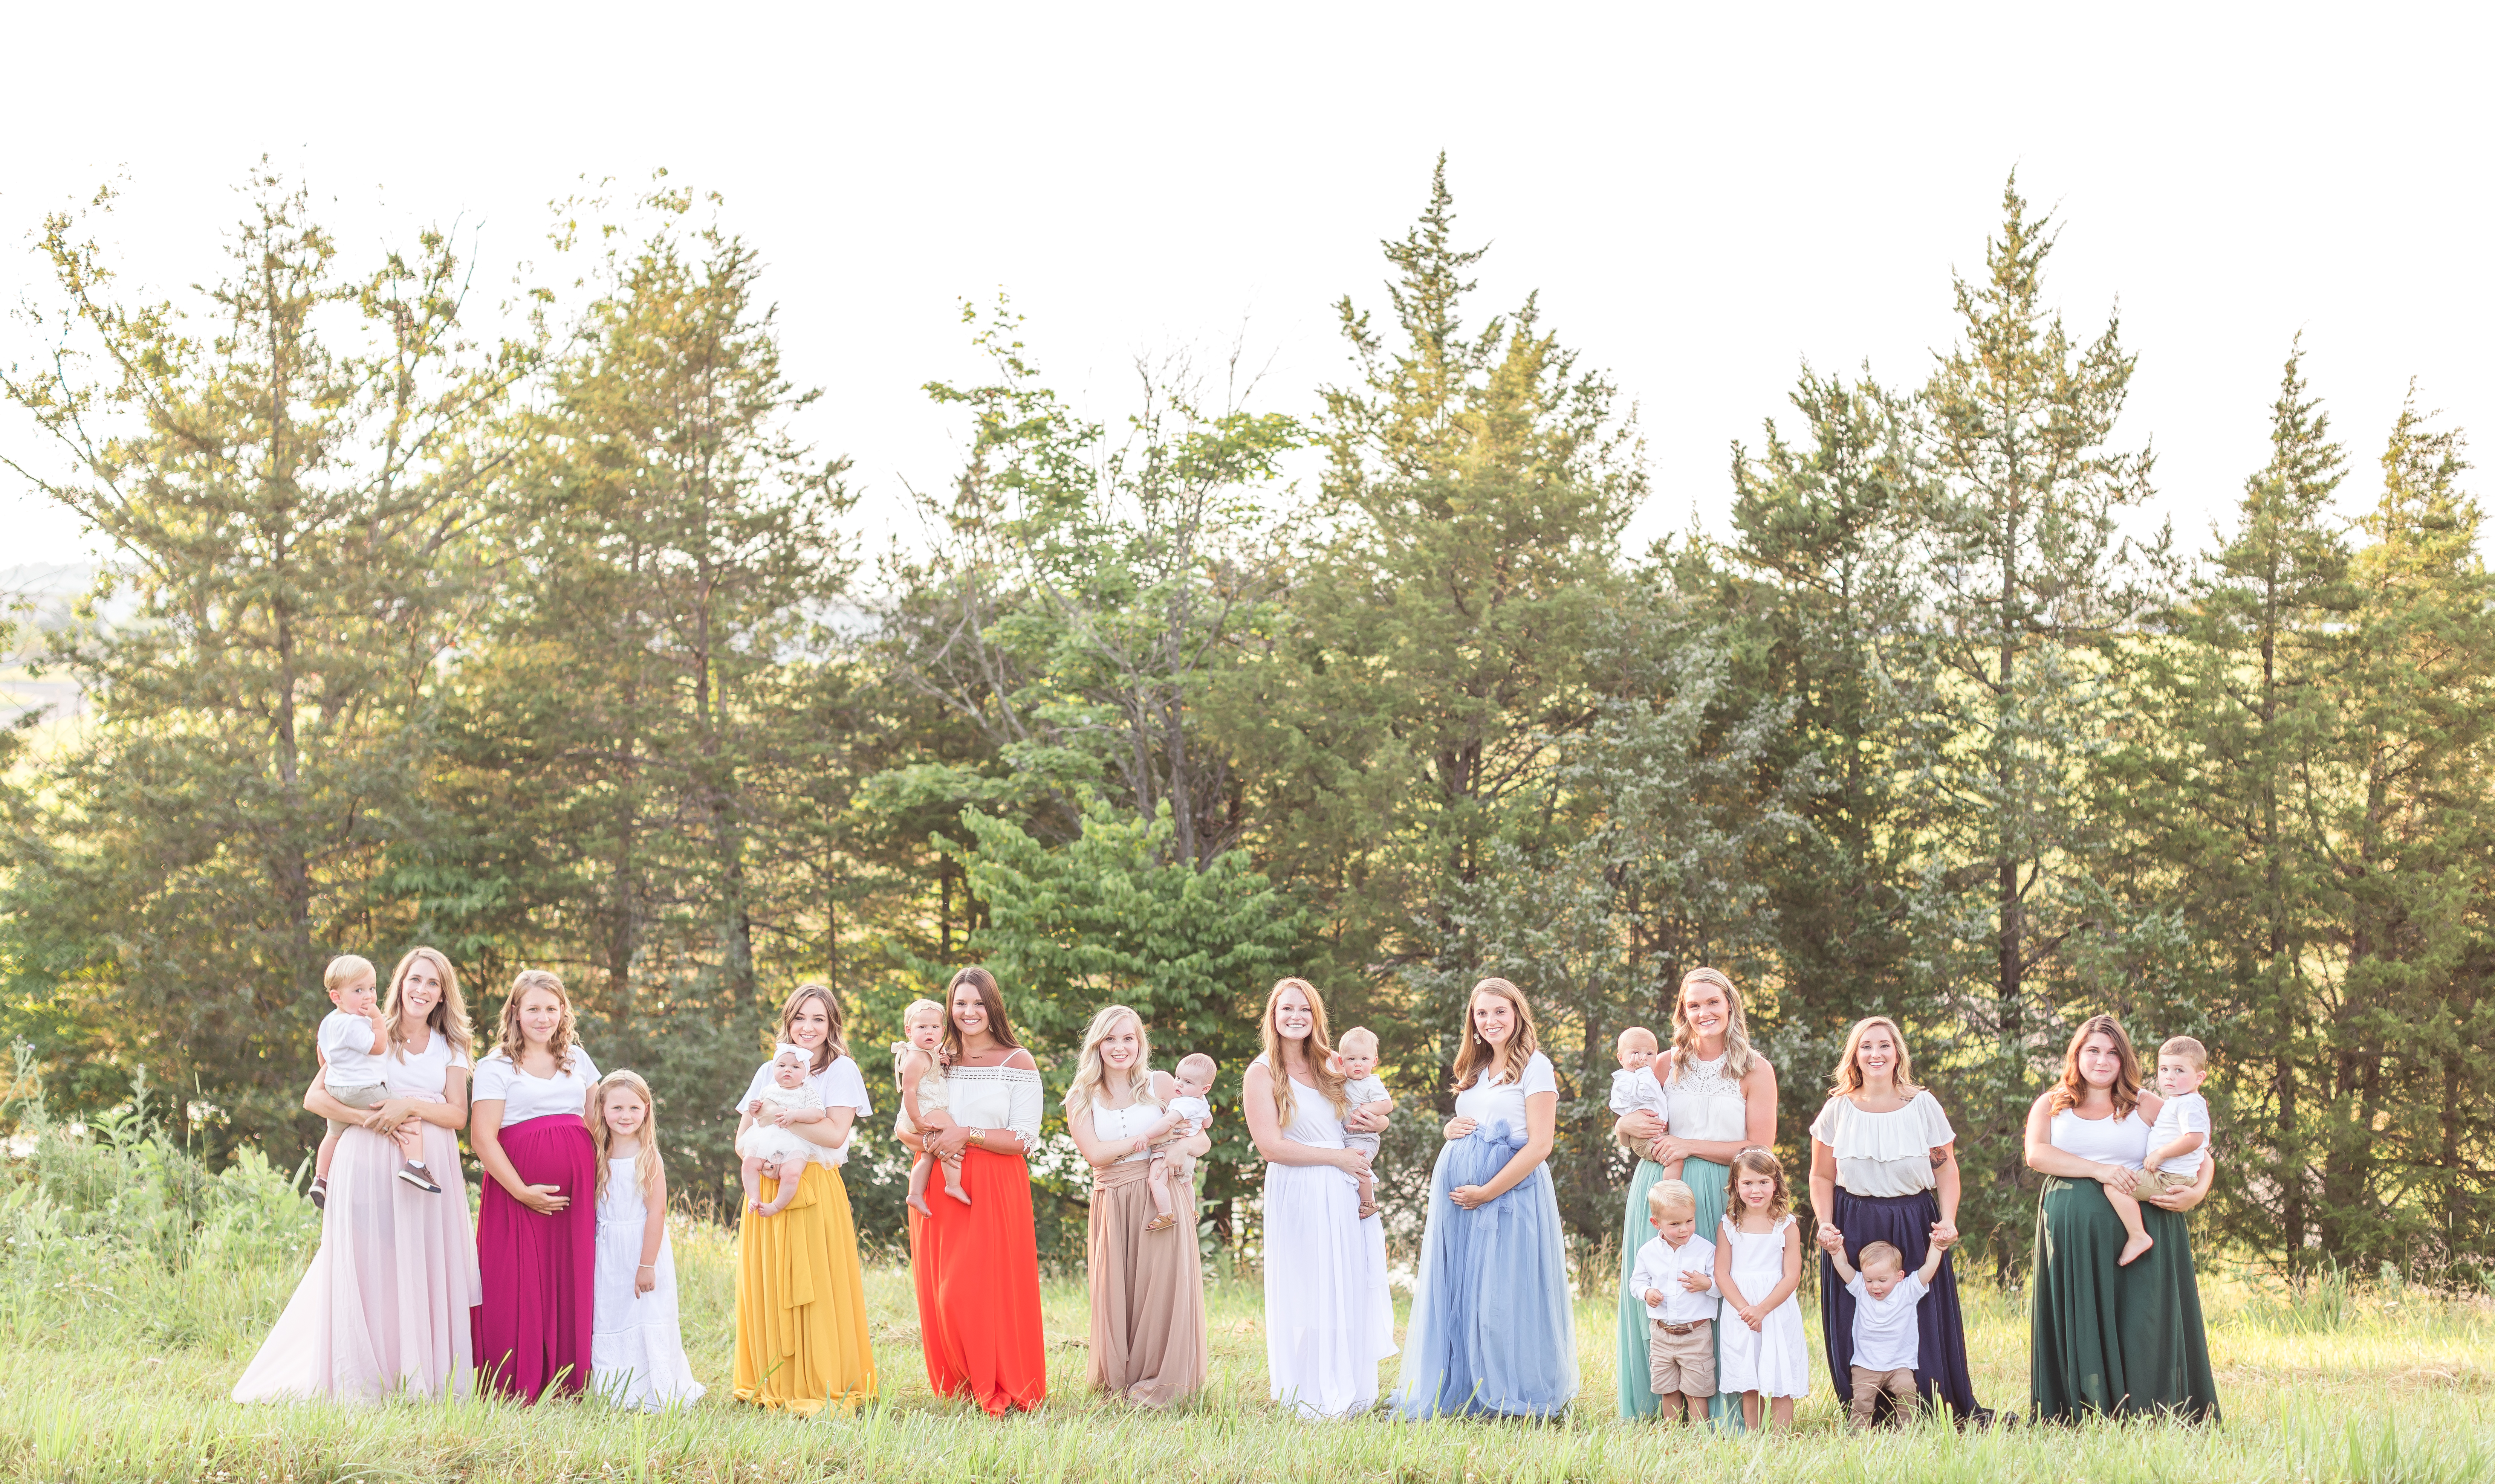 Mothers of all ages stand together holding their children, maternity bellies, and friends in long, flowy skirts of all colors as part of Amanda Shrader's the Skirt Project photoshoot.